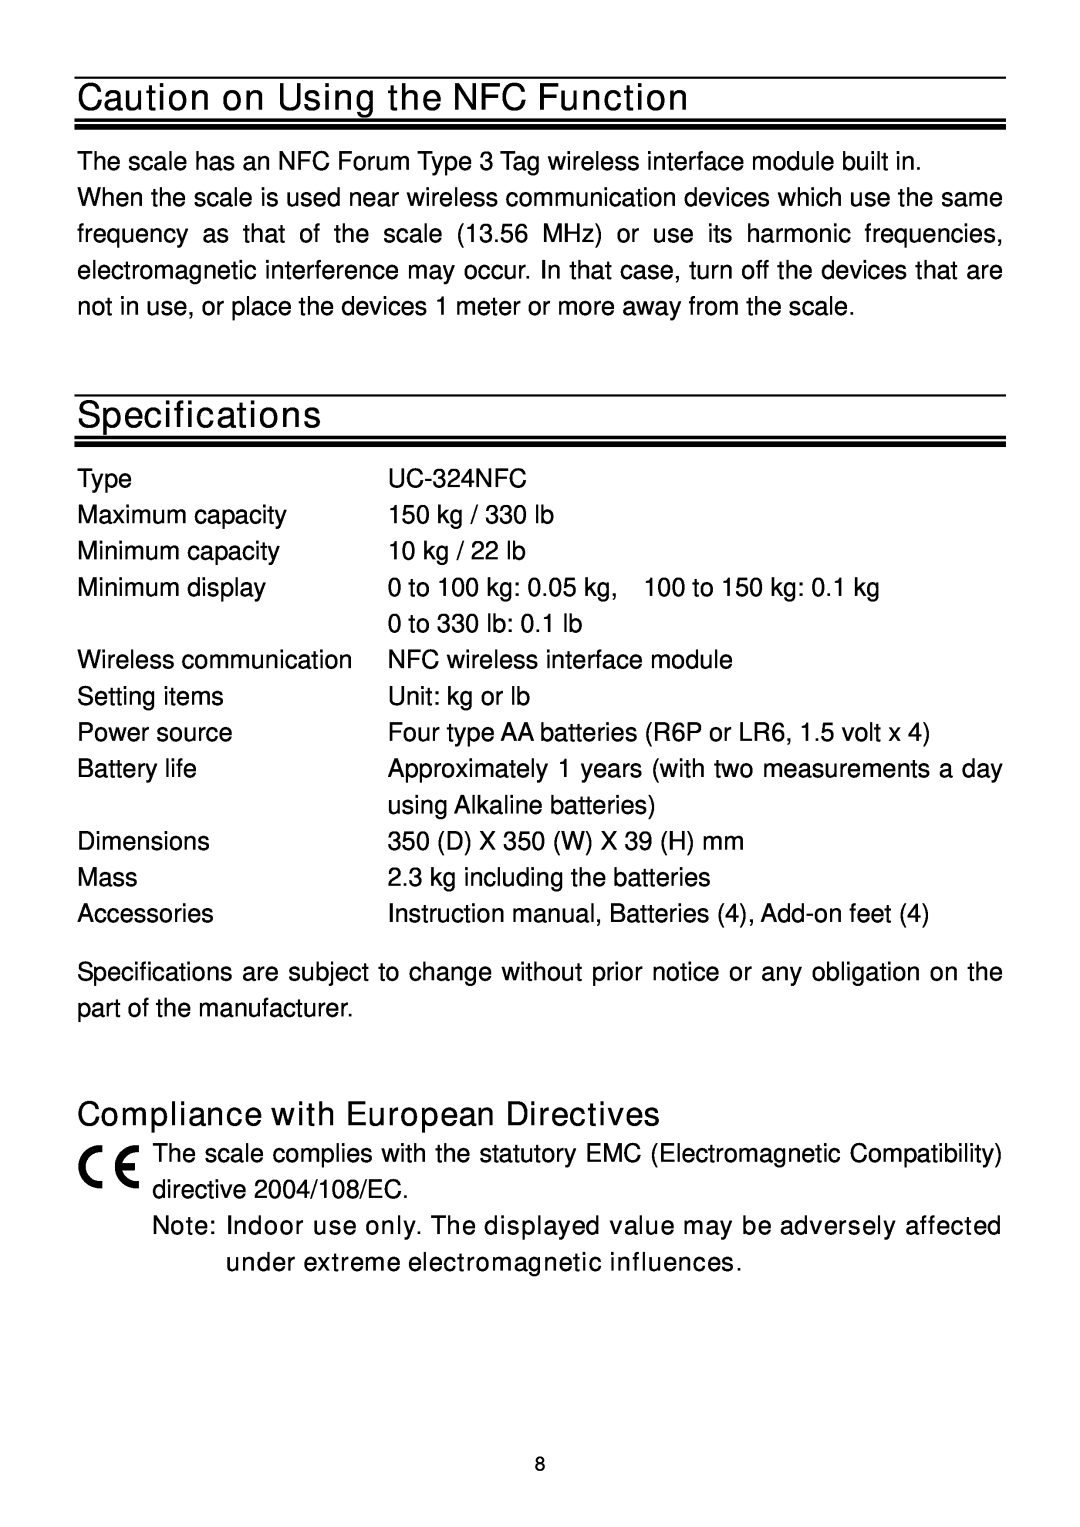 A&D UC-324NFC instruction manual Caution on Using the NFC Function, Specifications, Compliance with European Directives 